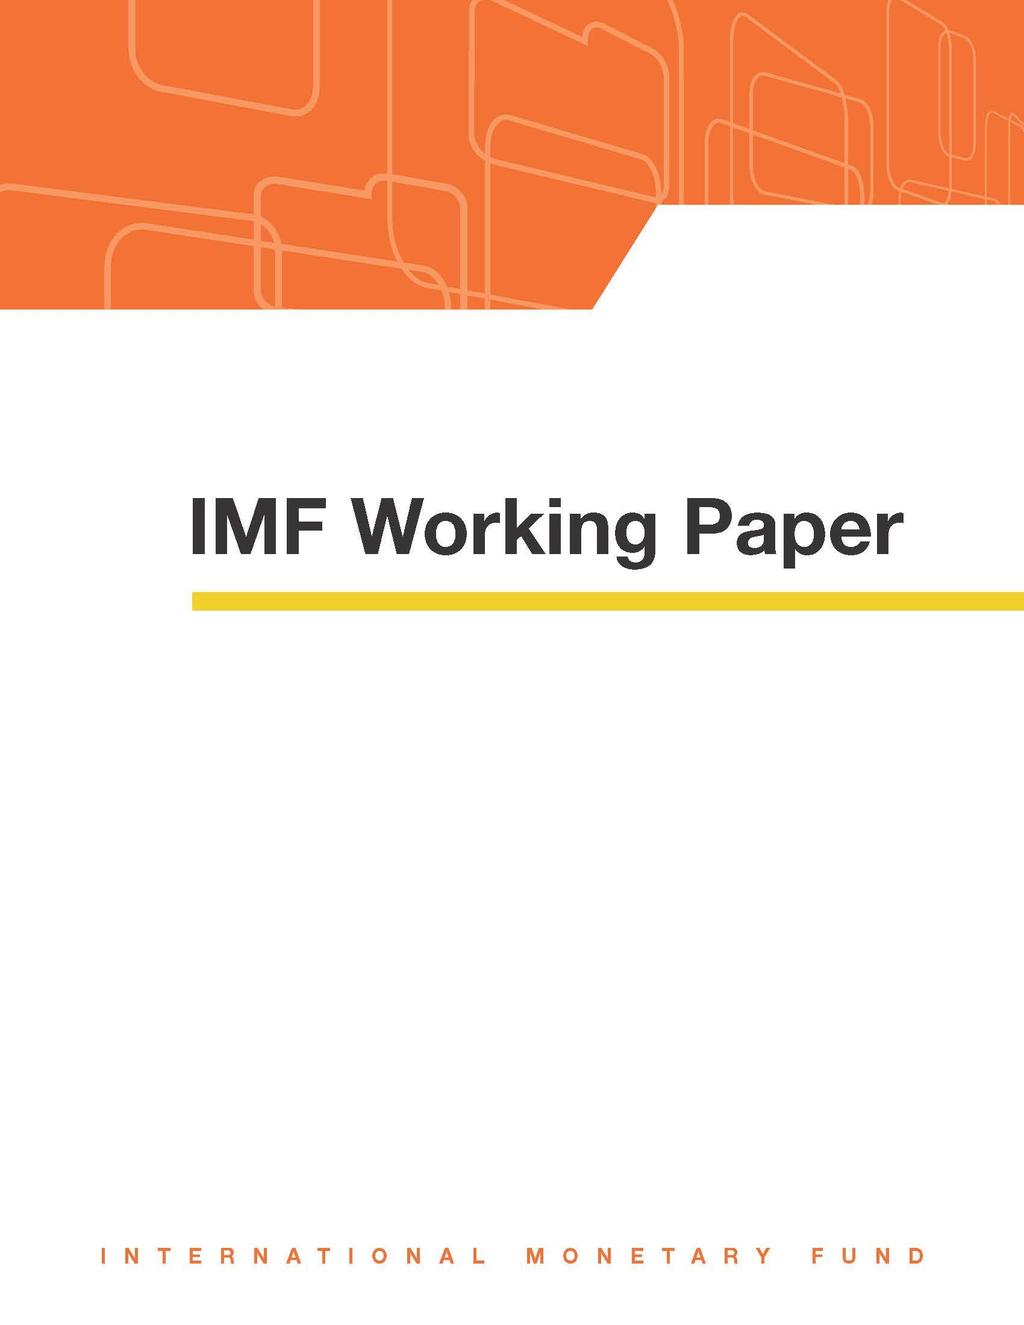 WP/17/XX Commodity Price Shocks and Financial Development by Mlachila Montfort and Rasmane Ouedraogo IMF Working Papers describe research in progress by the author(s) and are published to elicit